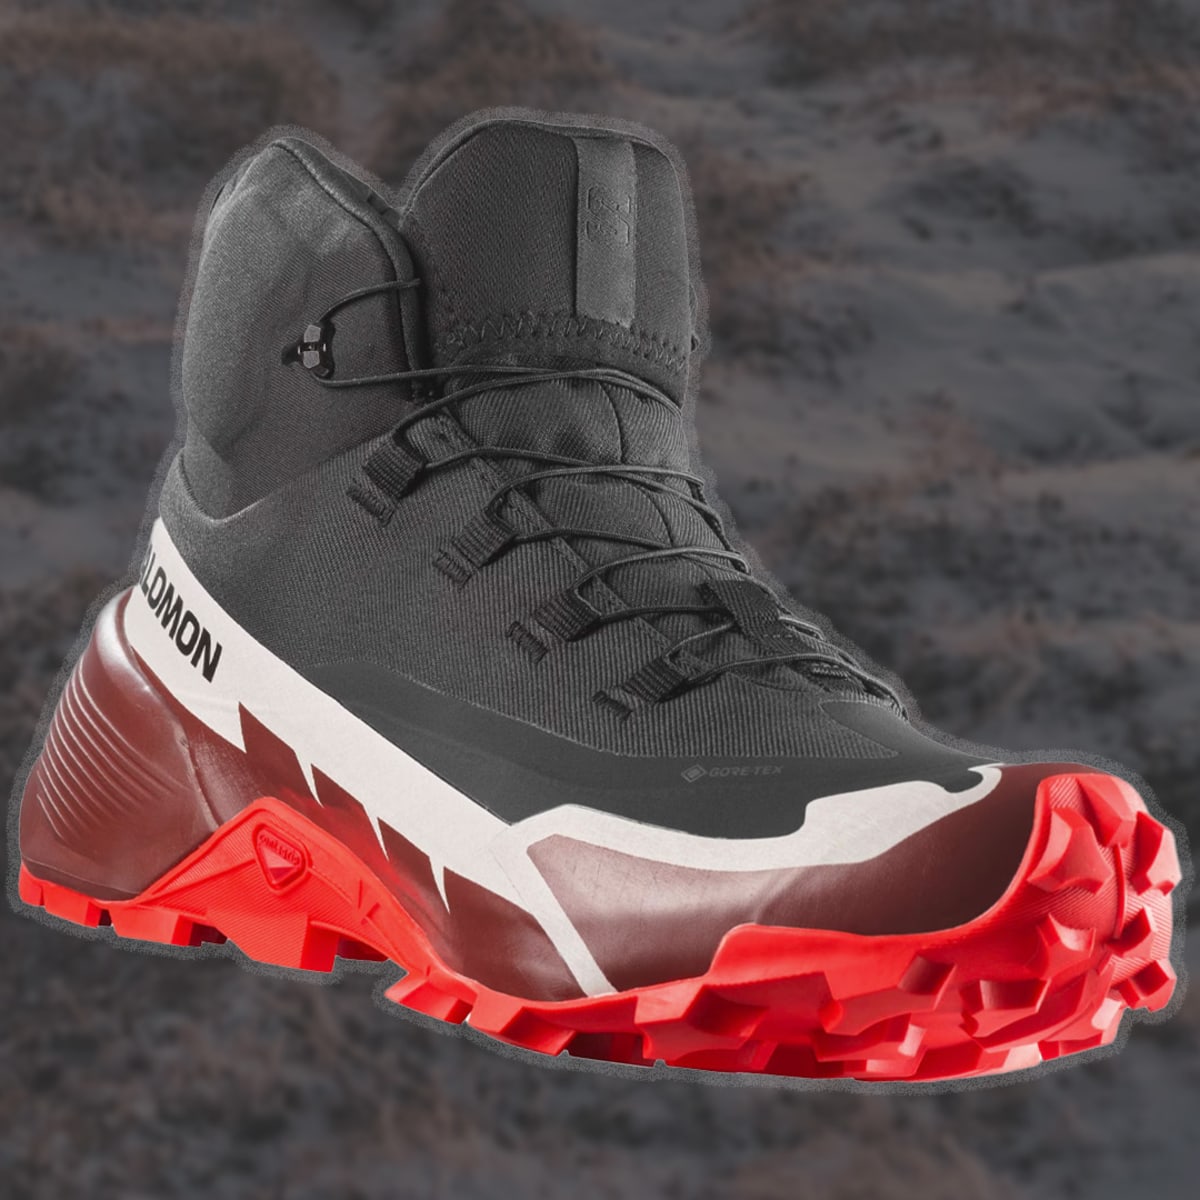 Salomon's Cross Hike 2 Mid Boot Is Up to 30% Off at REI - Men's Journal